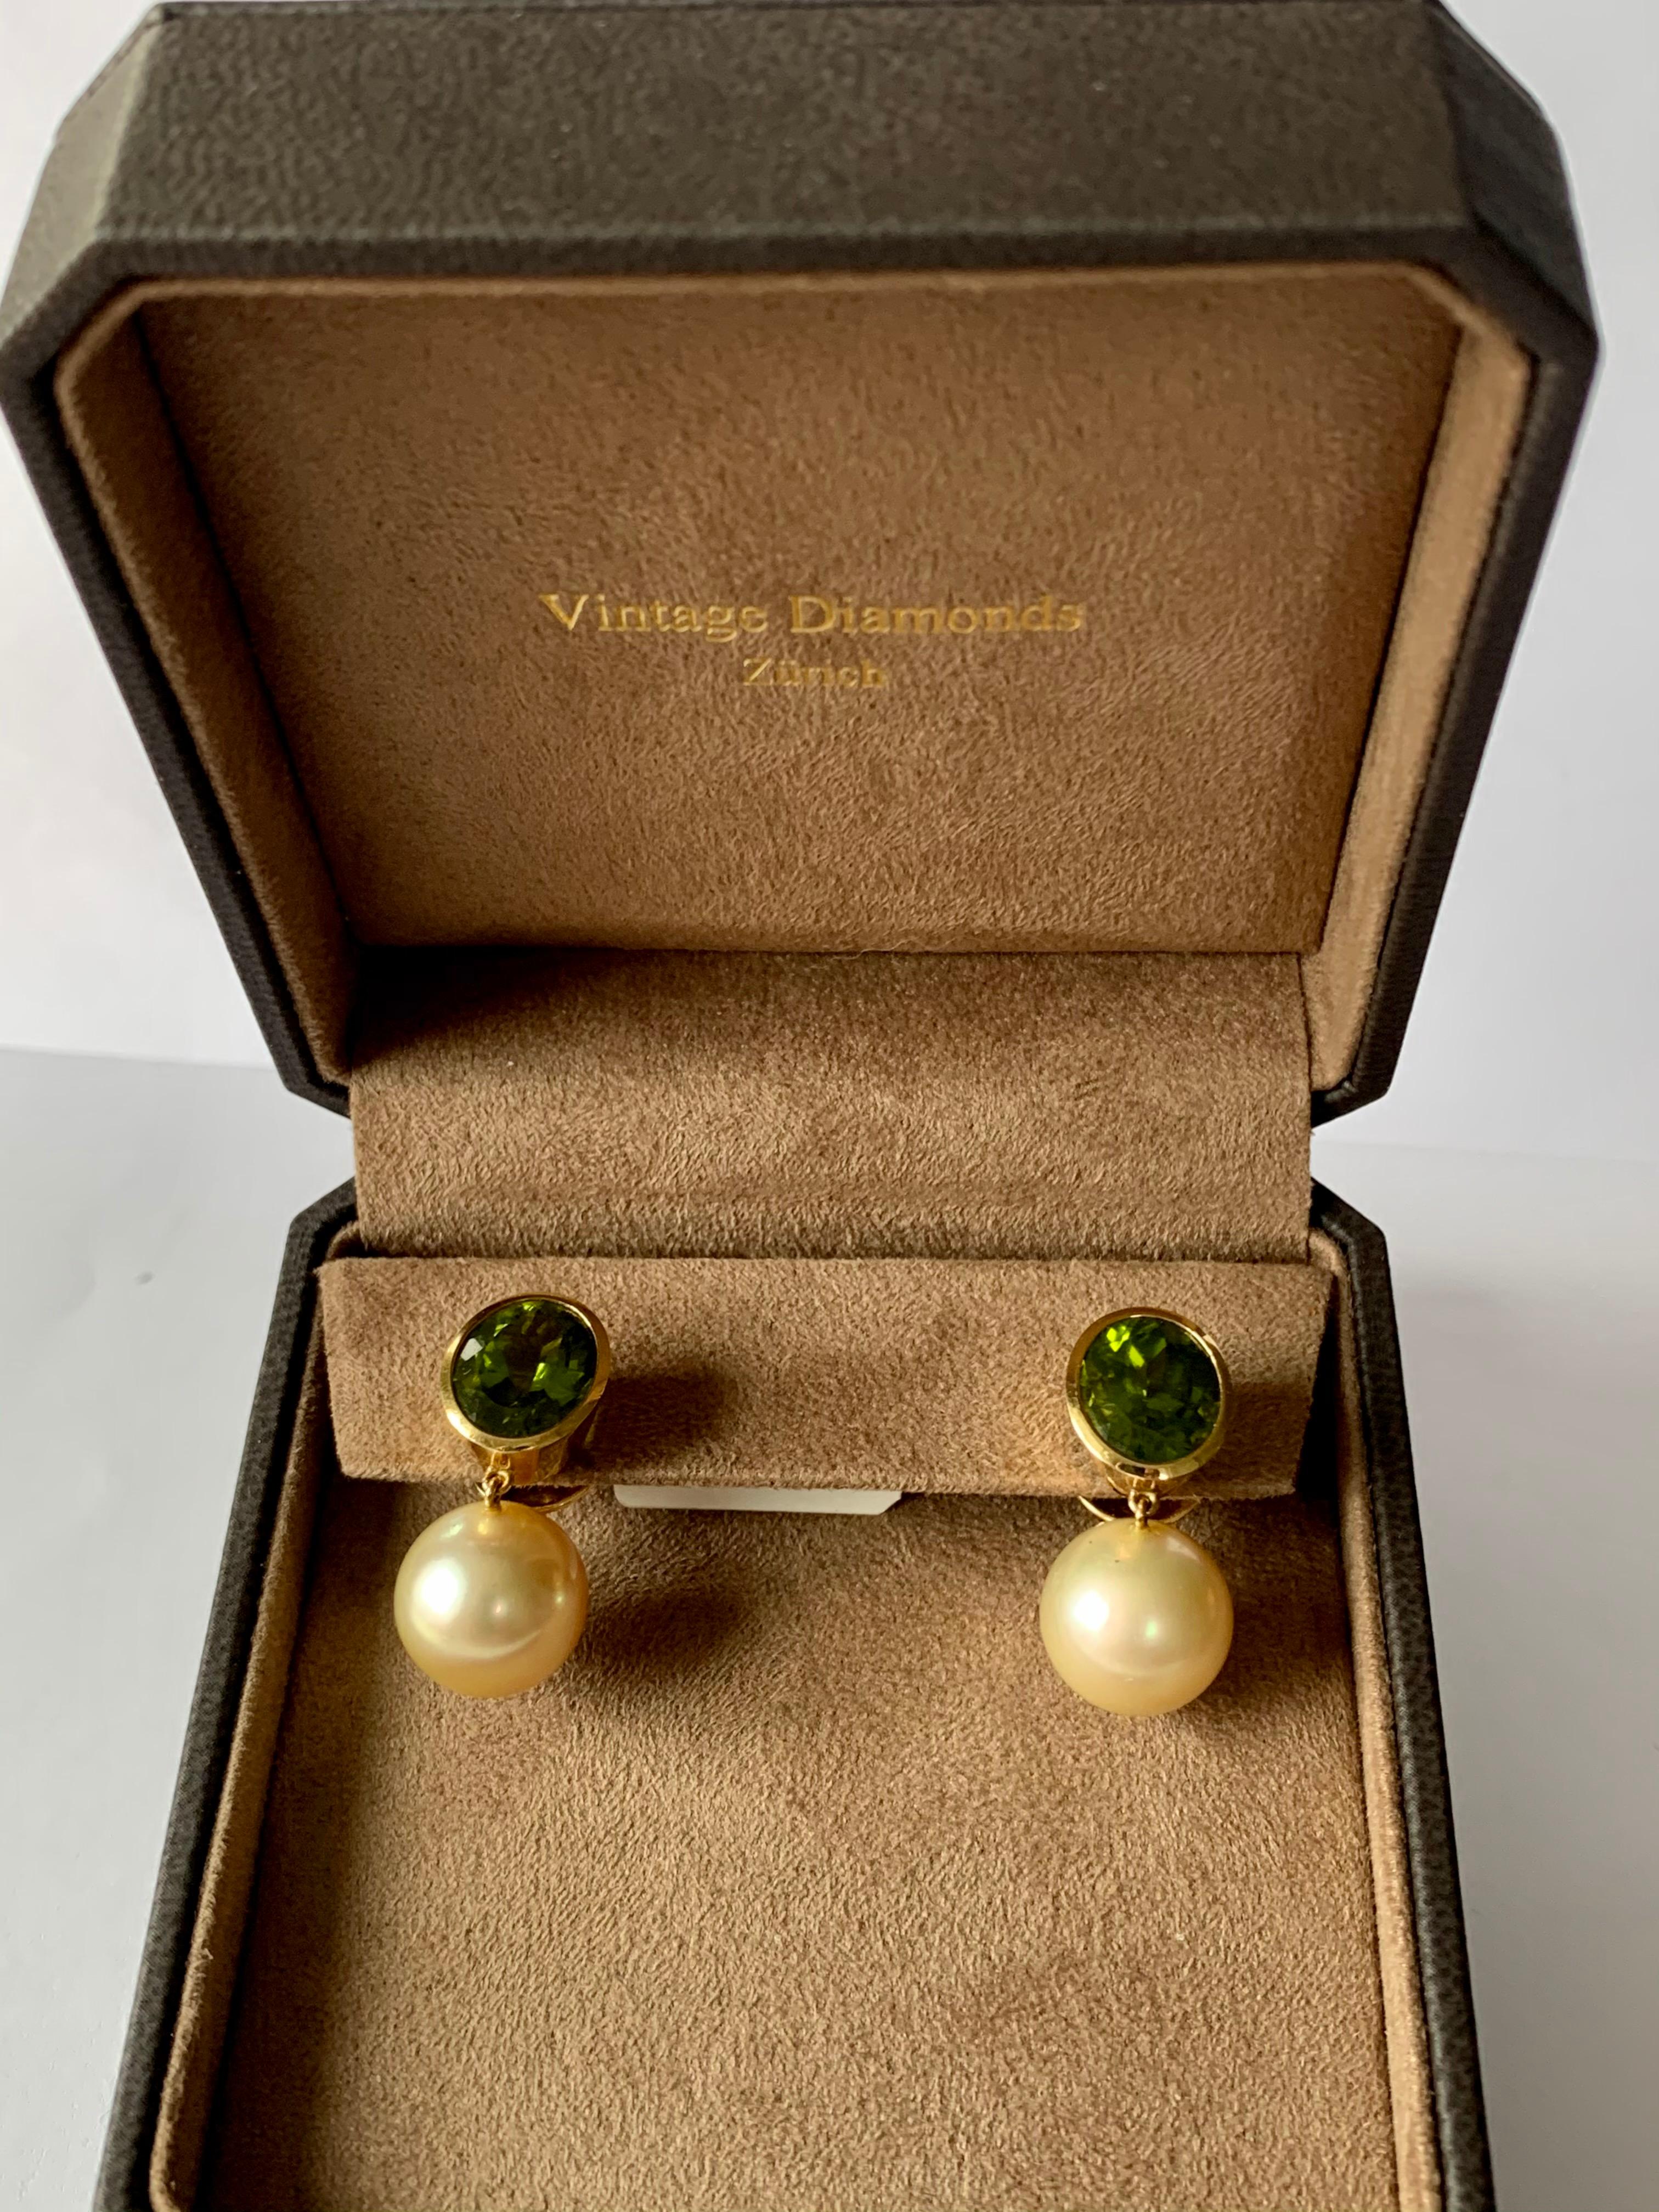 A pair of solid handcrafted 18 K yellow Gold earrings with 2 light golden South Sea pearls measuring 13.5 mm in Diameter. The top part features 2 bezel set fine Peridots totalling 11.47 ct.  A truly very nice and wearable pair of earrings with a